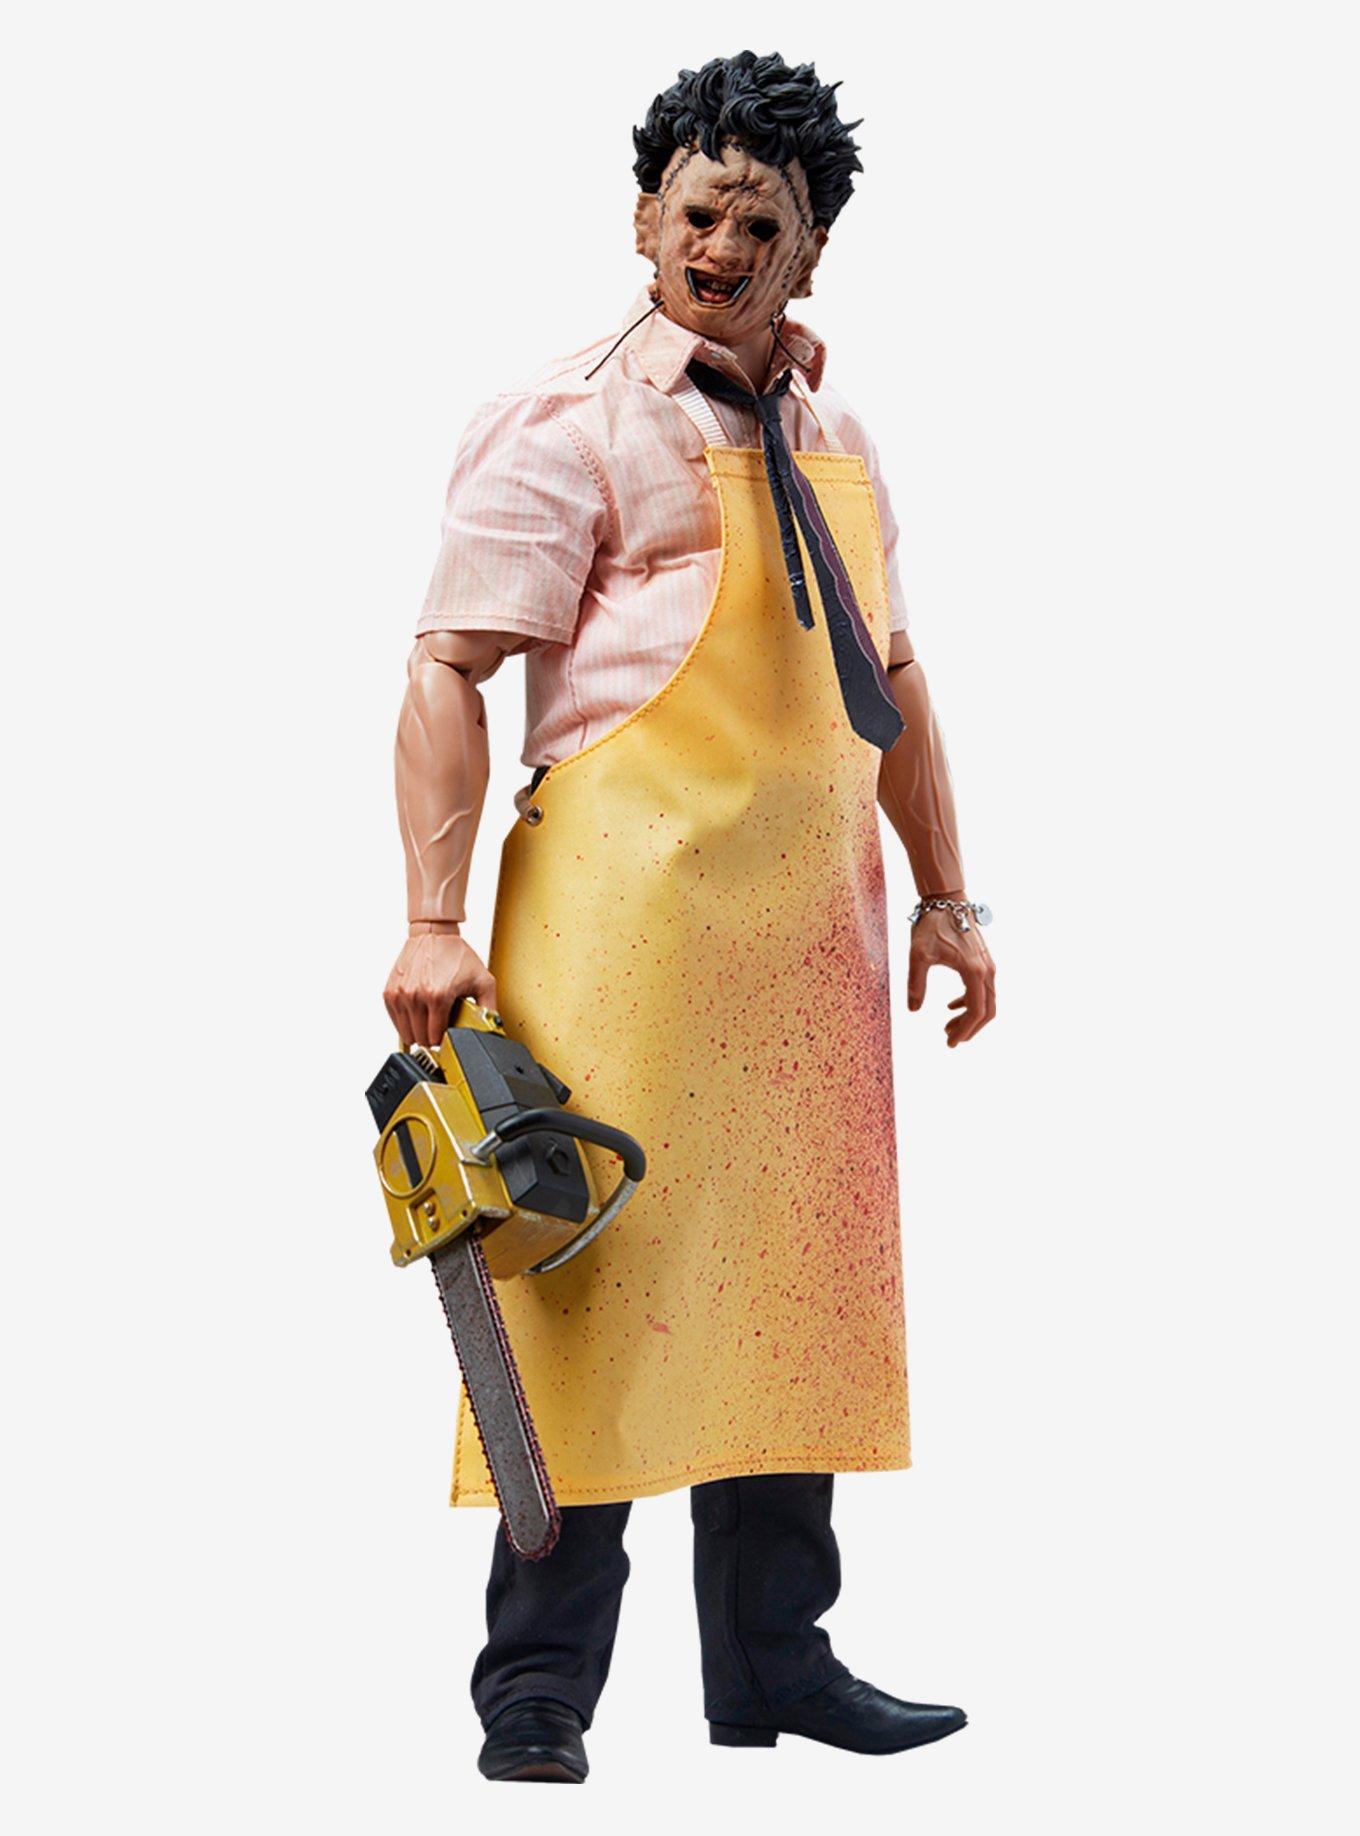 Leatherface (Killing Mask) Sixth Scale Figure by Sideshow Collectibles